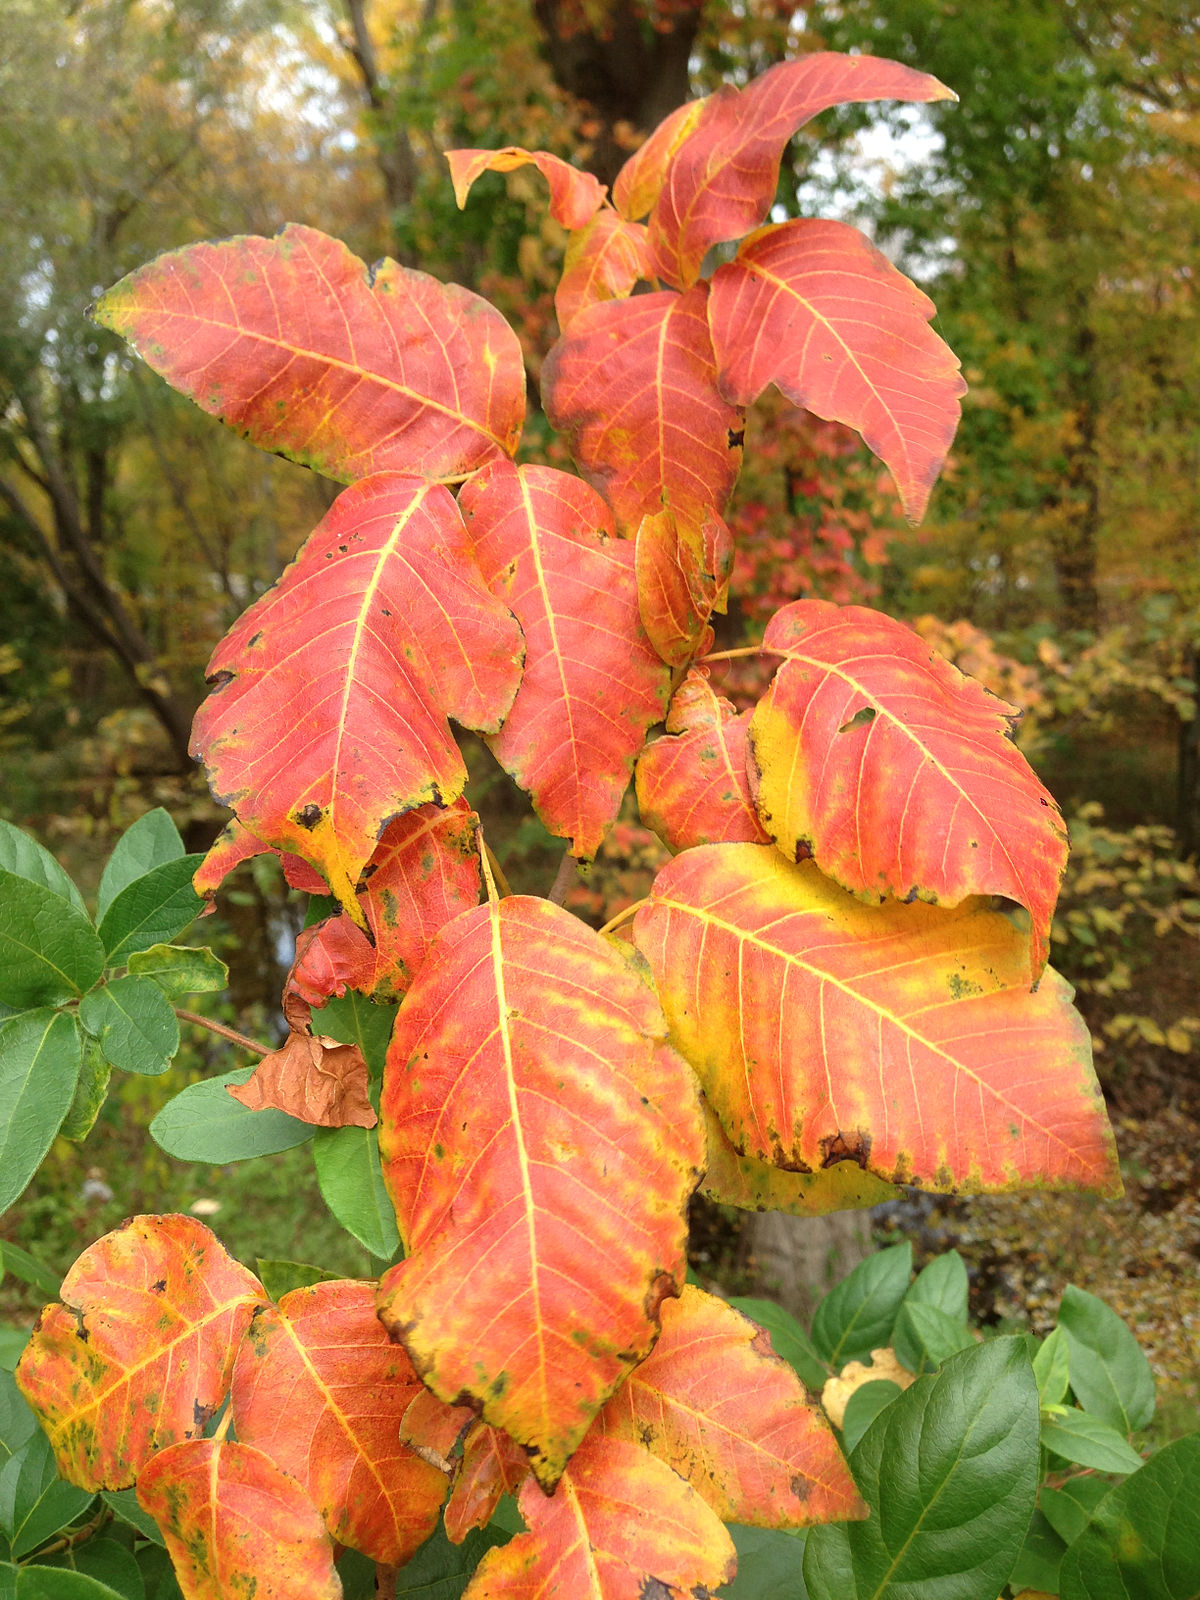 https://upload.wikimedia.org/wikipedia/commons/thumb/9/9d/2014-10-29_13_43_39_Poison_Ivy_foliage_during_autumn_leaf_coloration_in_Ewing%2C_New_Jersey.JPG/1200px-2014-10-29_13_43_39_Poison_Ivy_foliage_during_autumn_leaf_coloration_in_Ewing%2C_New_Jersey.JPG